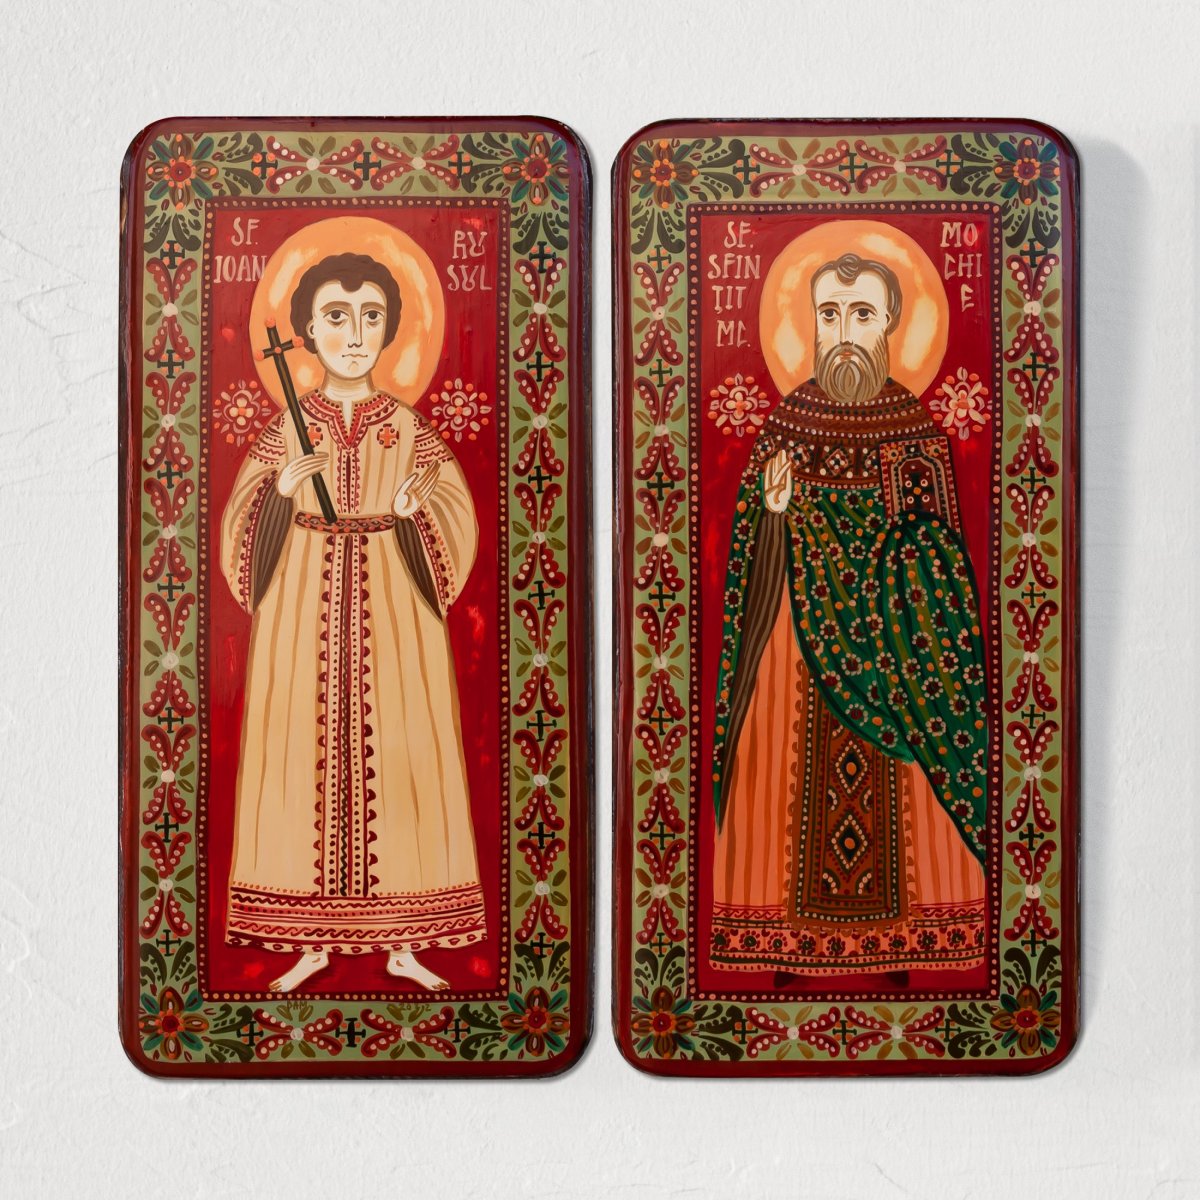 Wood icon, diptych, "St. John the Russian and St. Mocius", 2 x 10x20 cm